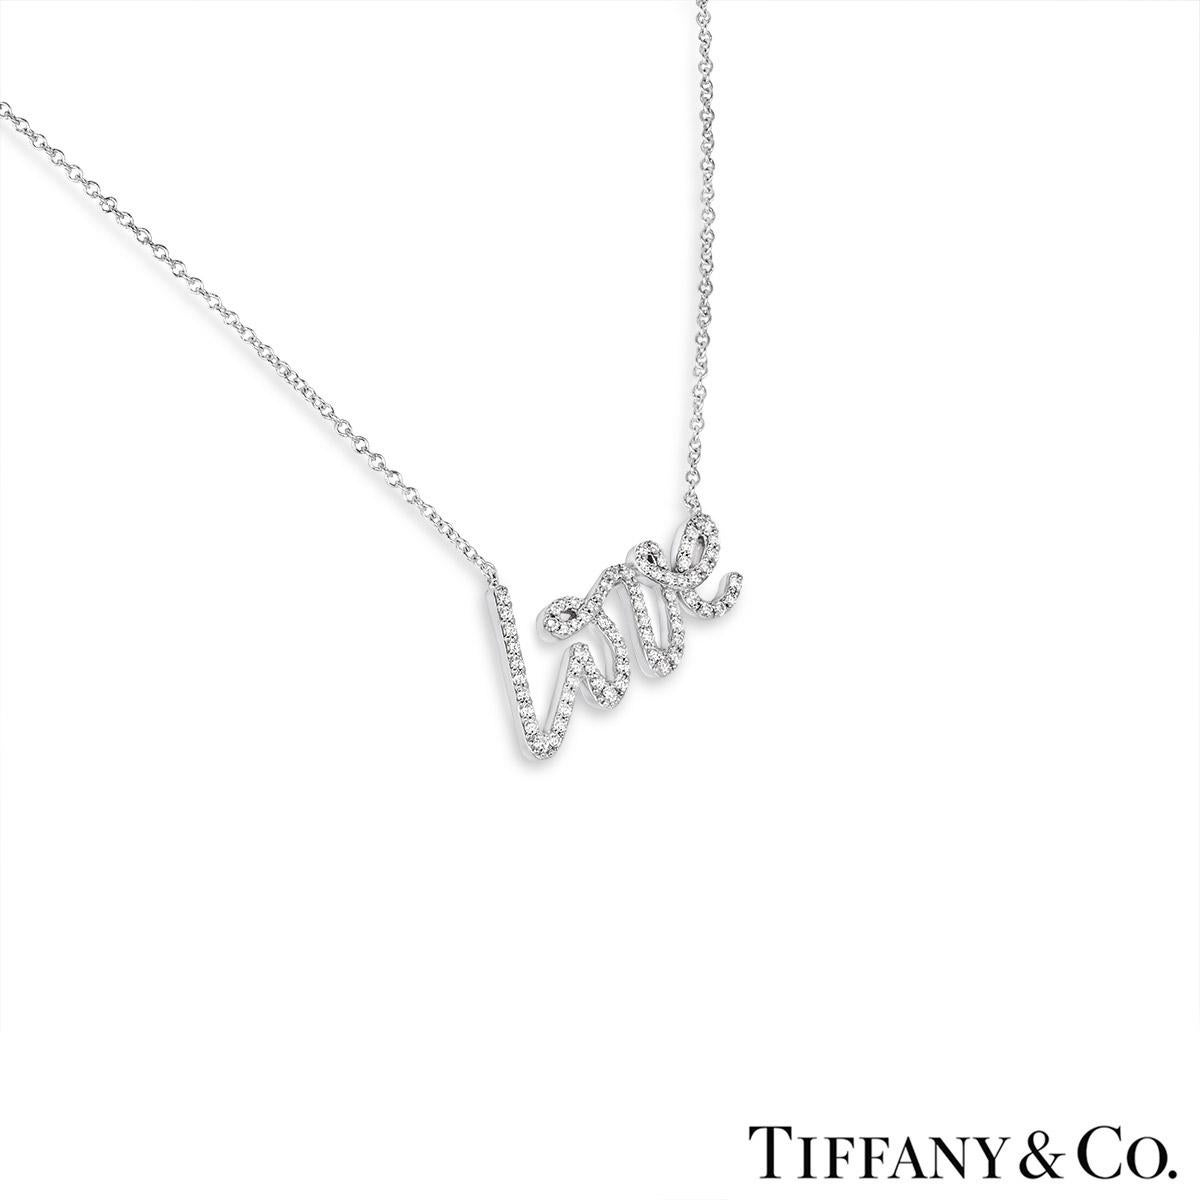 A chic 18k white gold diamond pendant from Tiffany & Co. from Paloma Picasso's Graffiti collection. The pendant features the word 'Love' pave set with 68 round brilliant cut diamonds with an approximate total weight of 0.15ct, E-F colour and VS